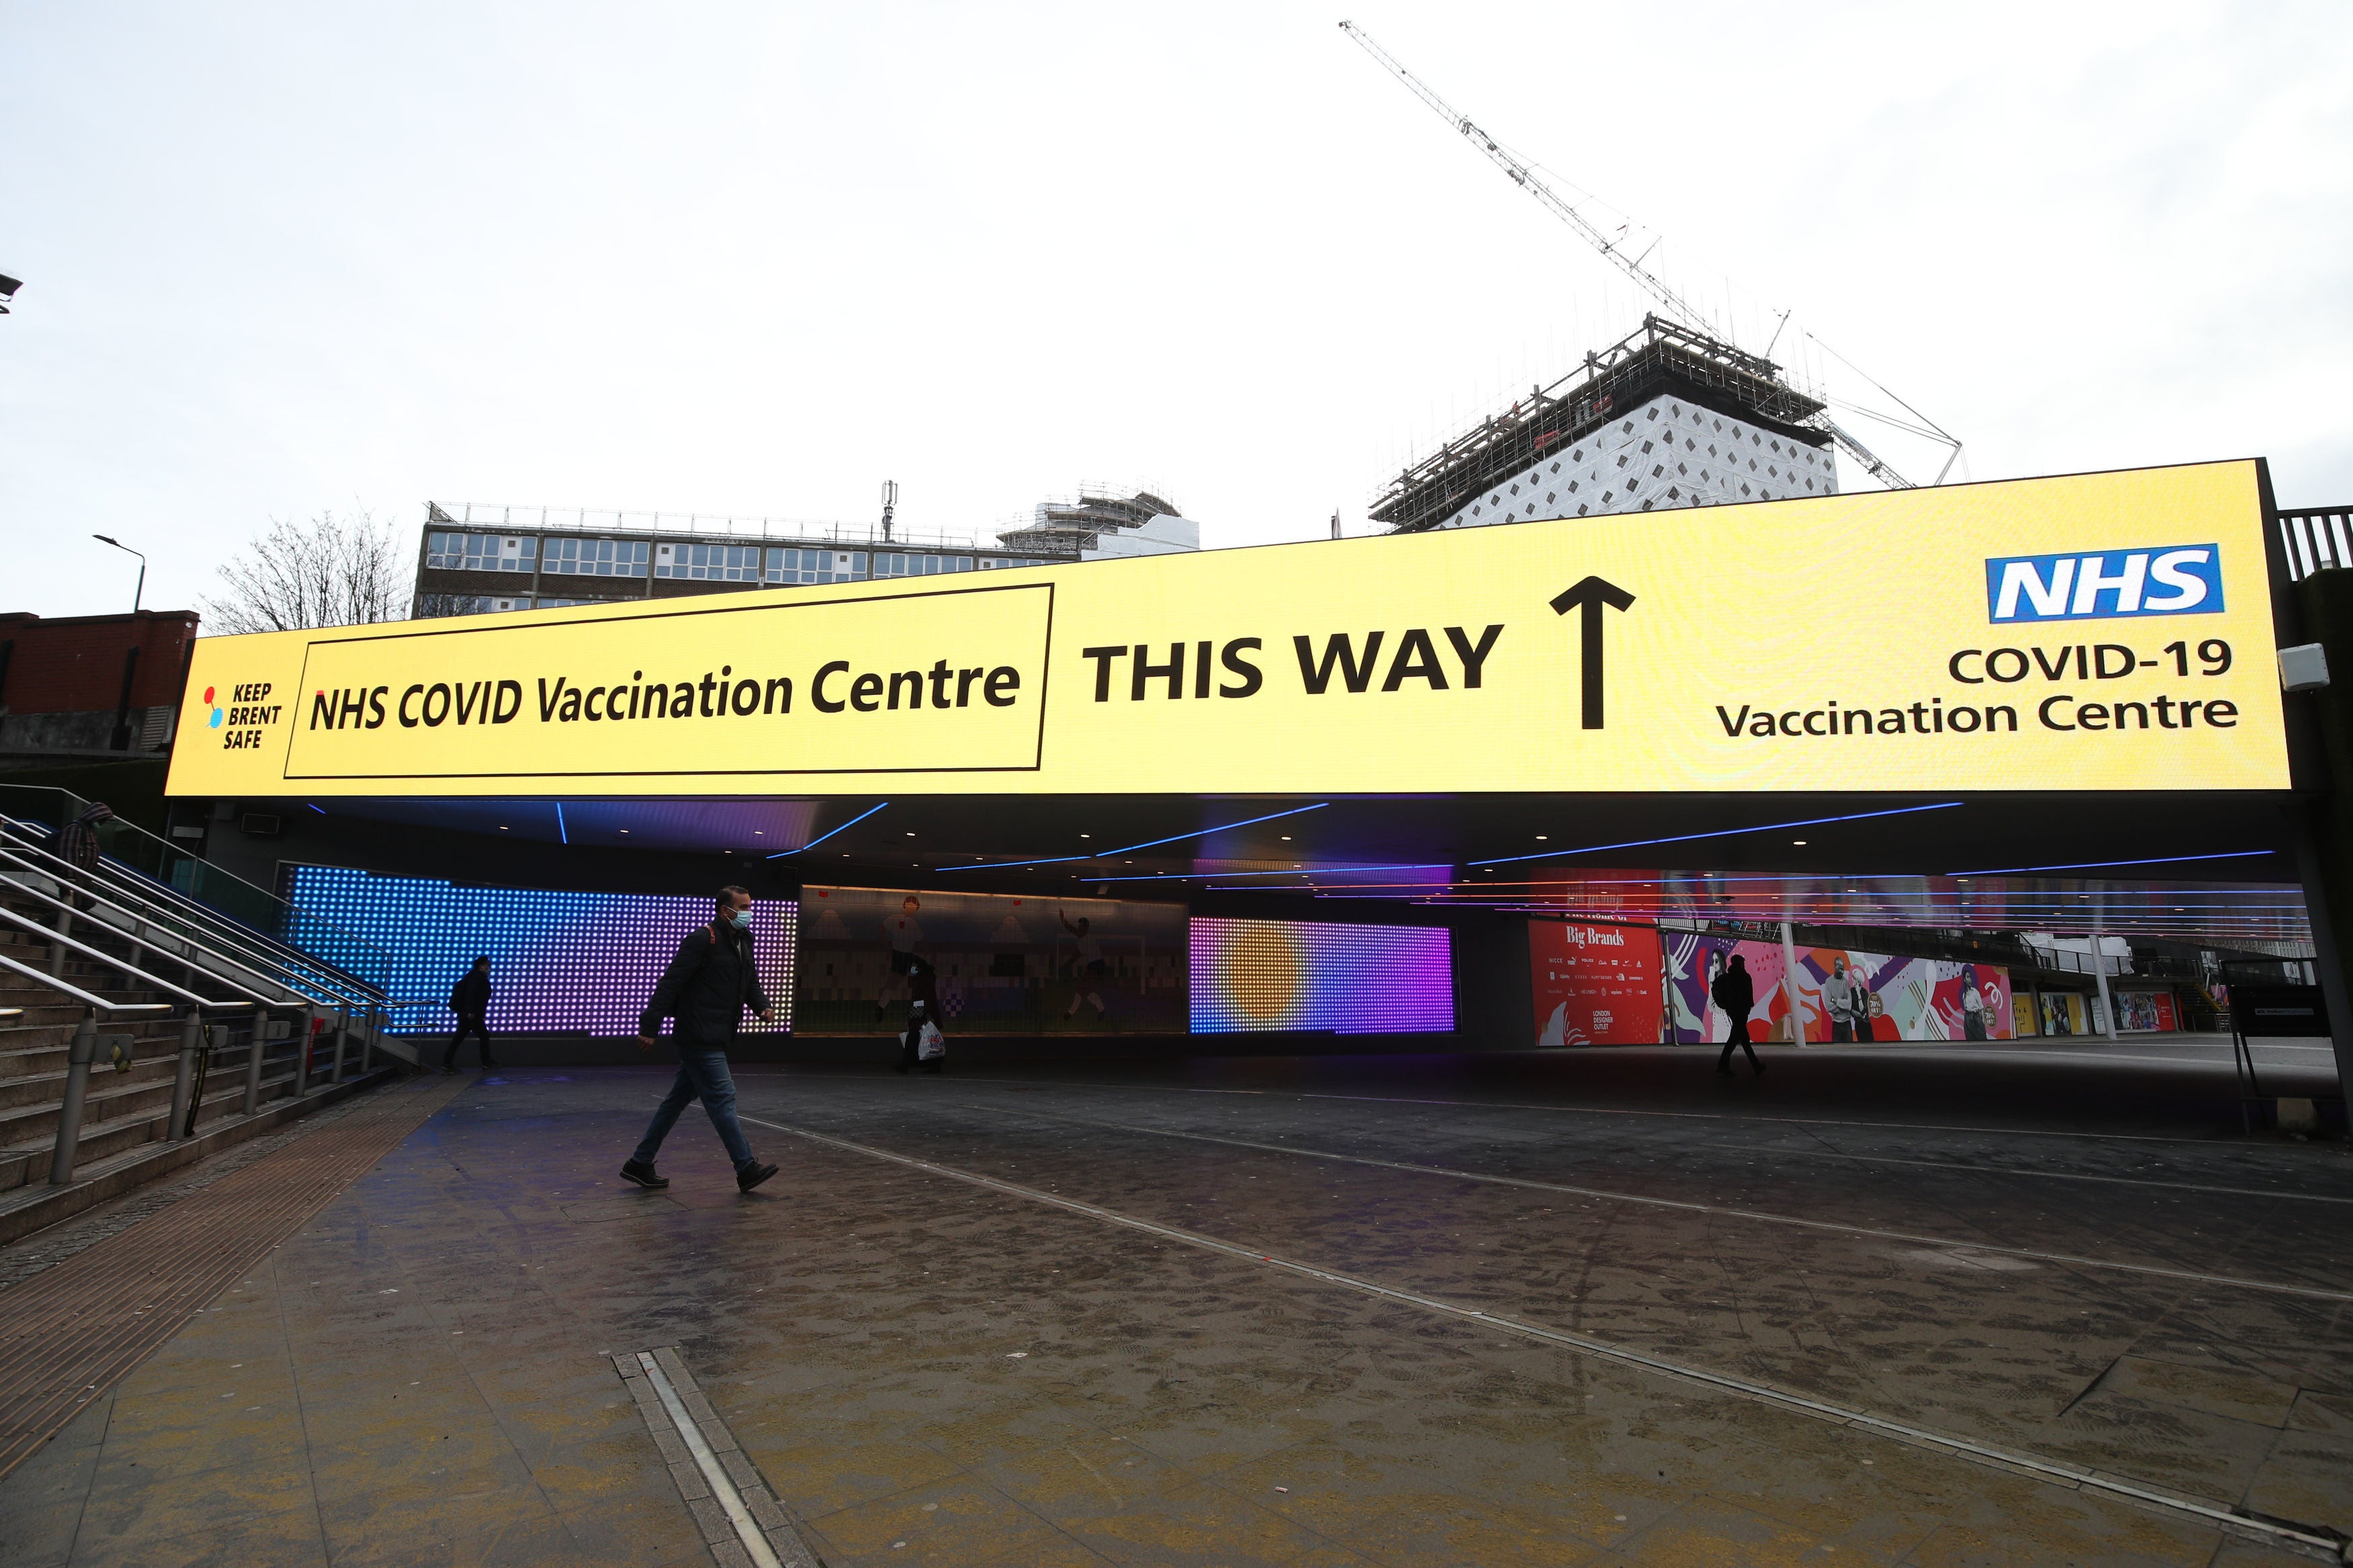 One of the new vaccination hubs has opened near Wembley Stadium in London